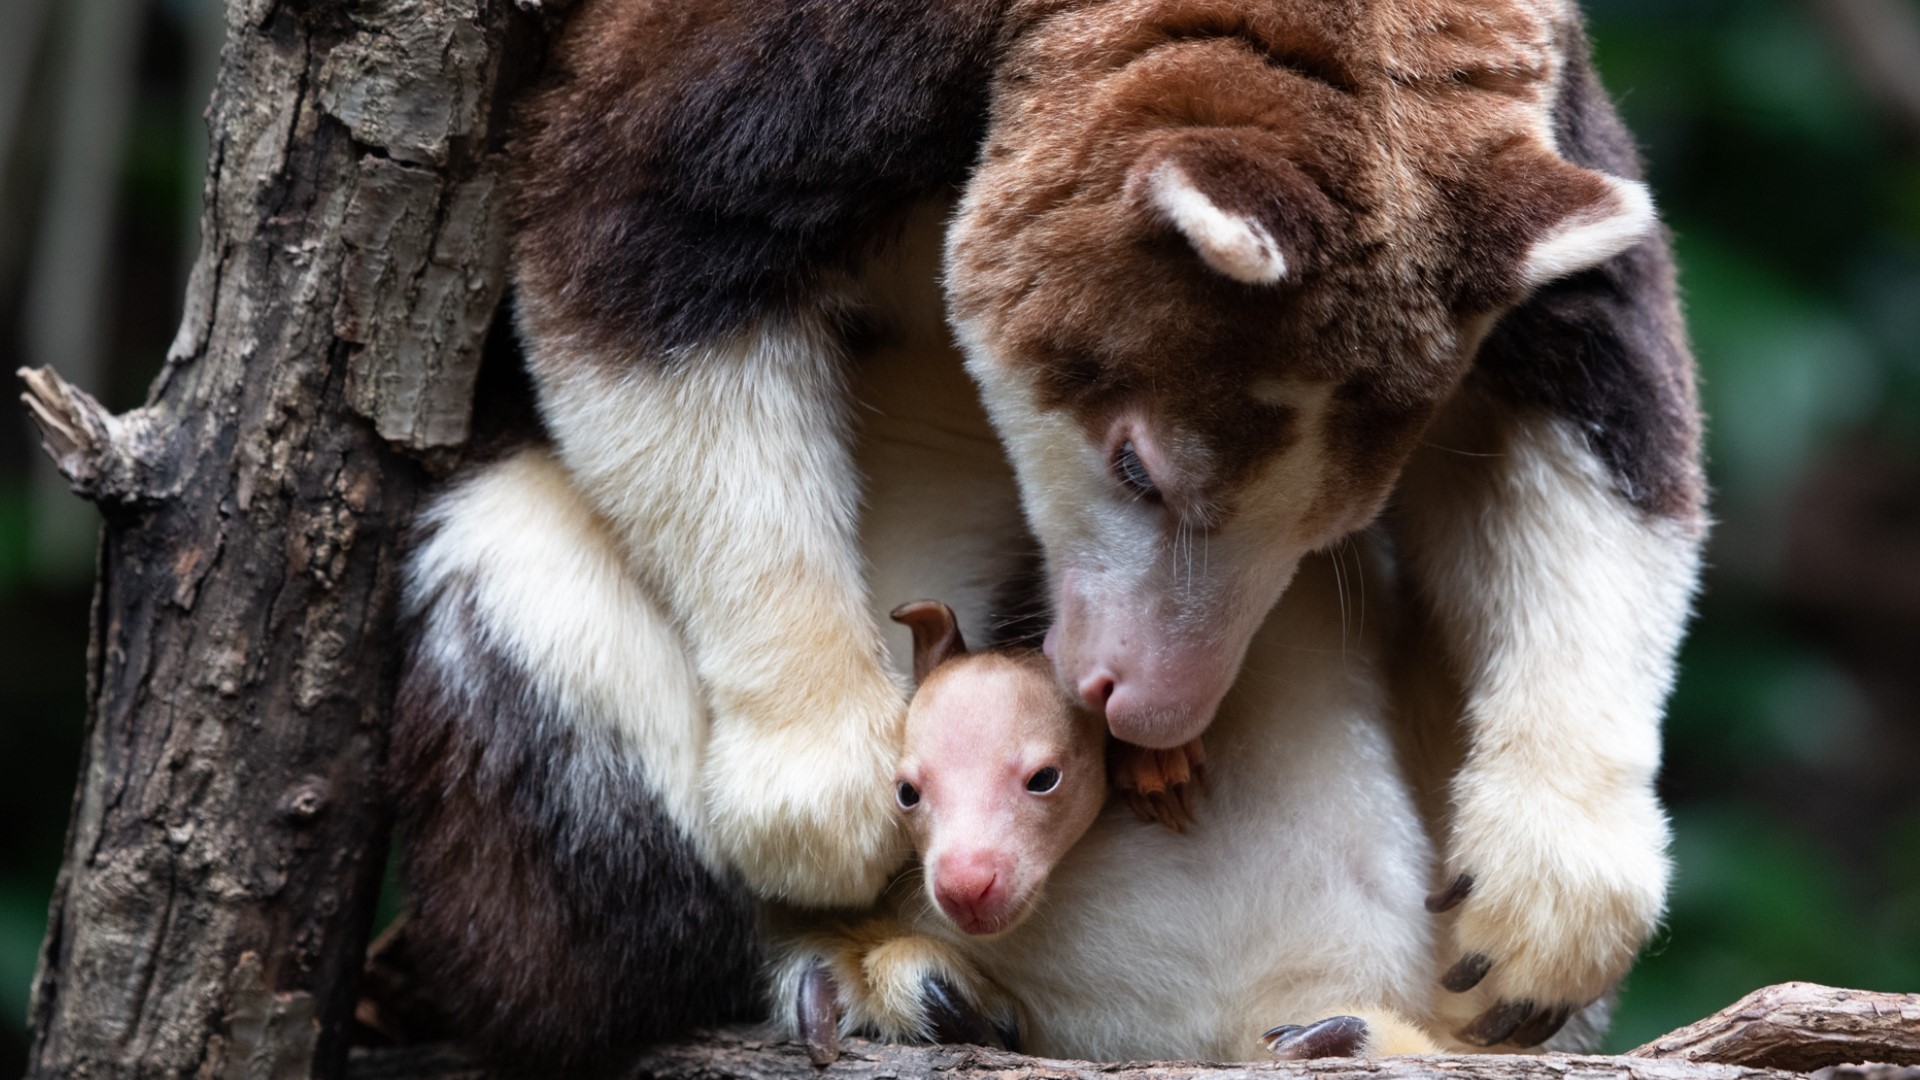 A Matschie’s tree kangaroo born at the Bronx Zoo has started to emerge from its mother’s pouch, making its anticipated public debut.